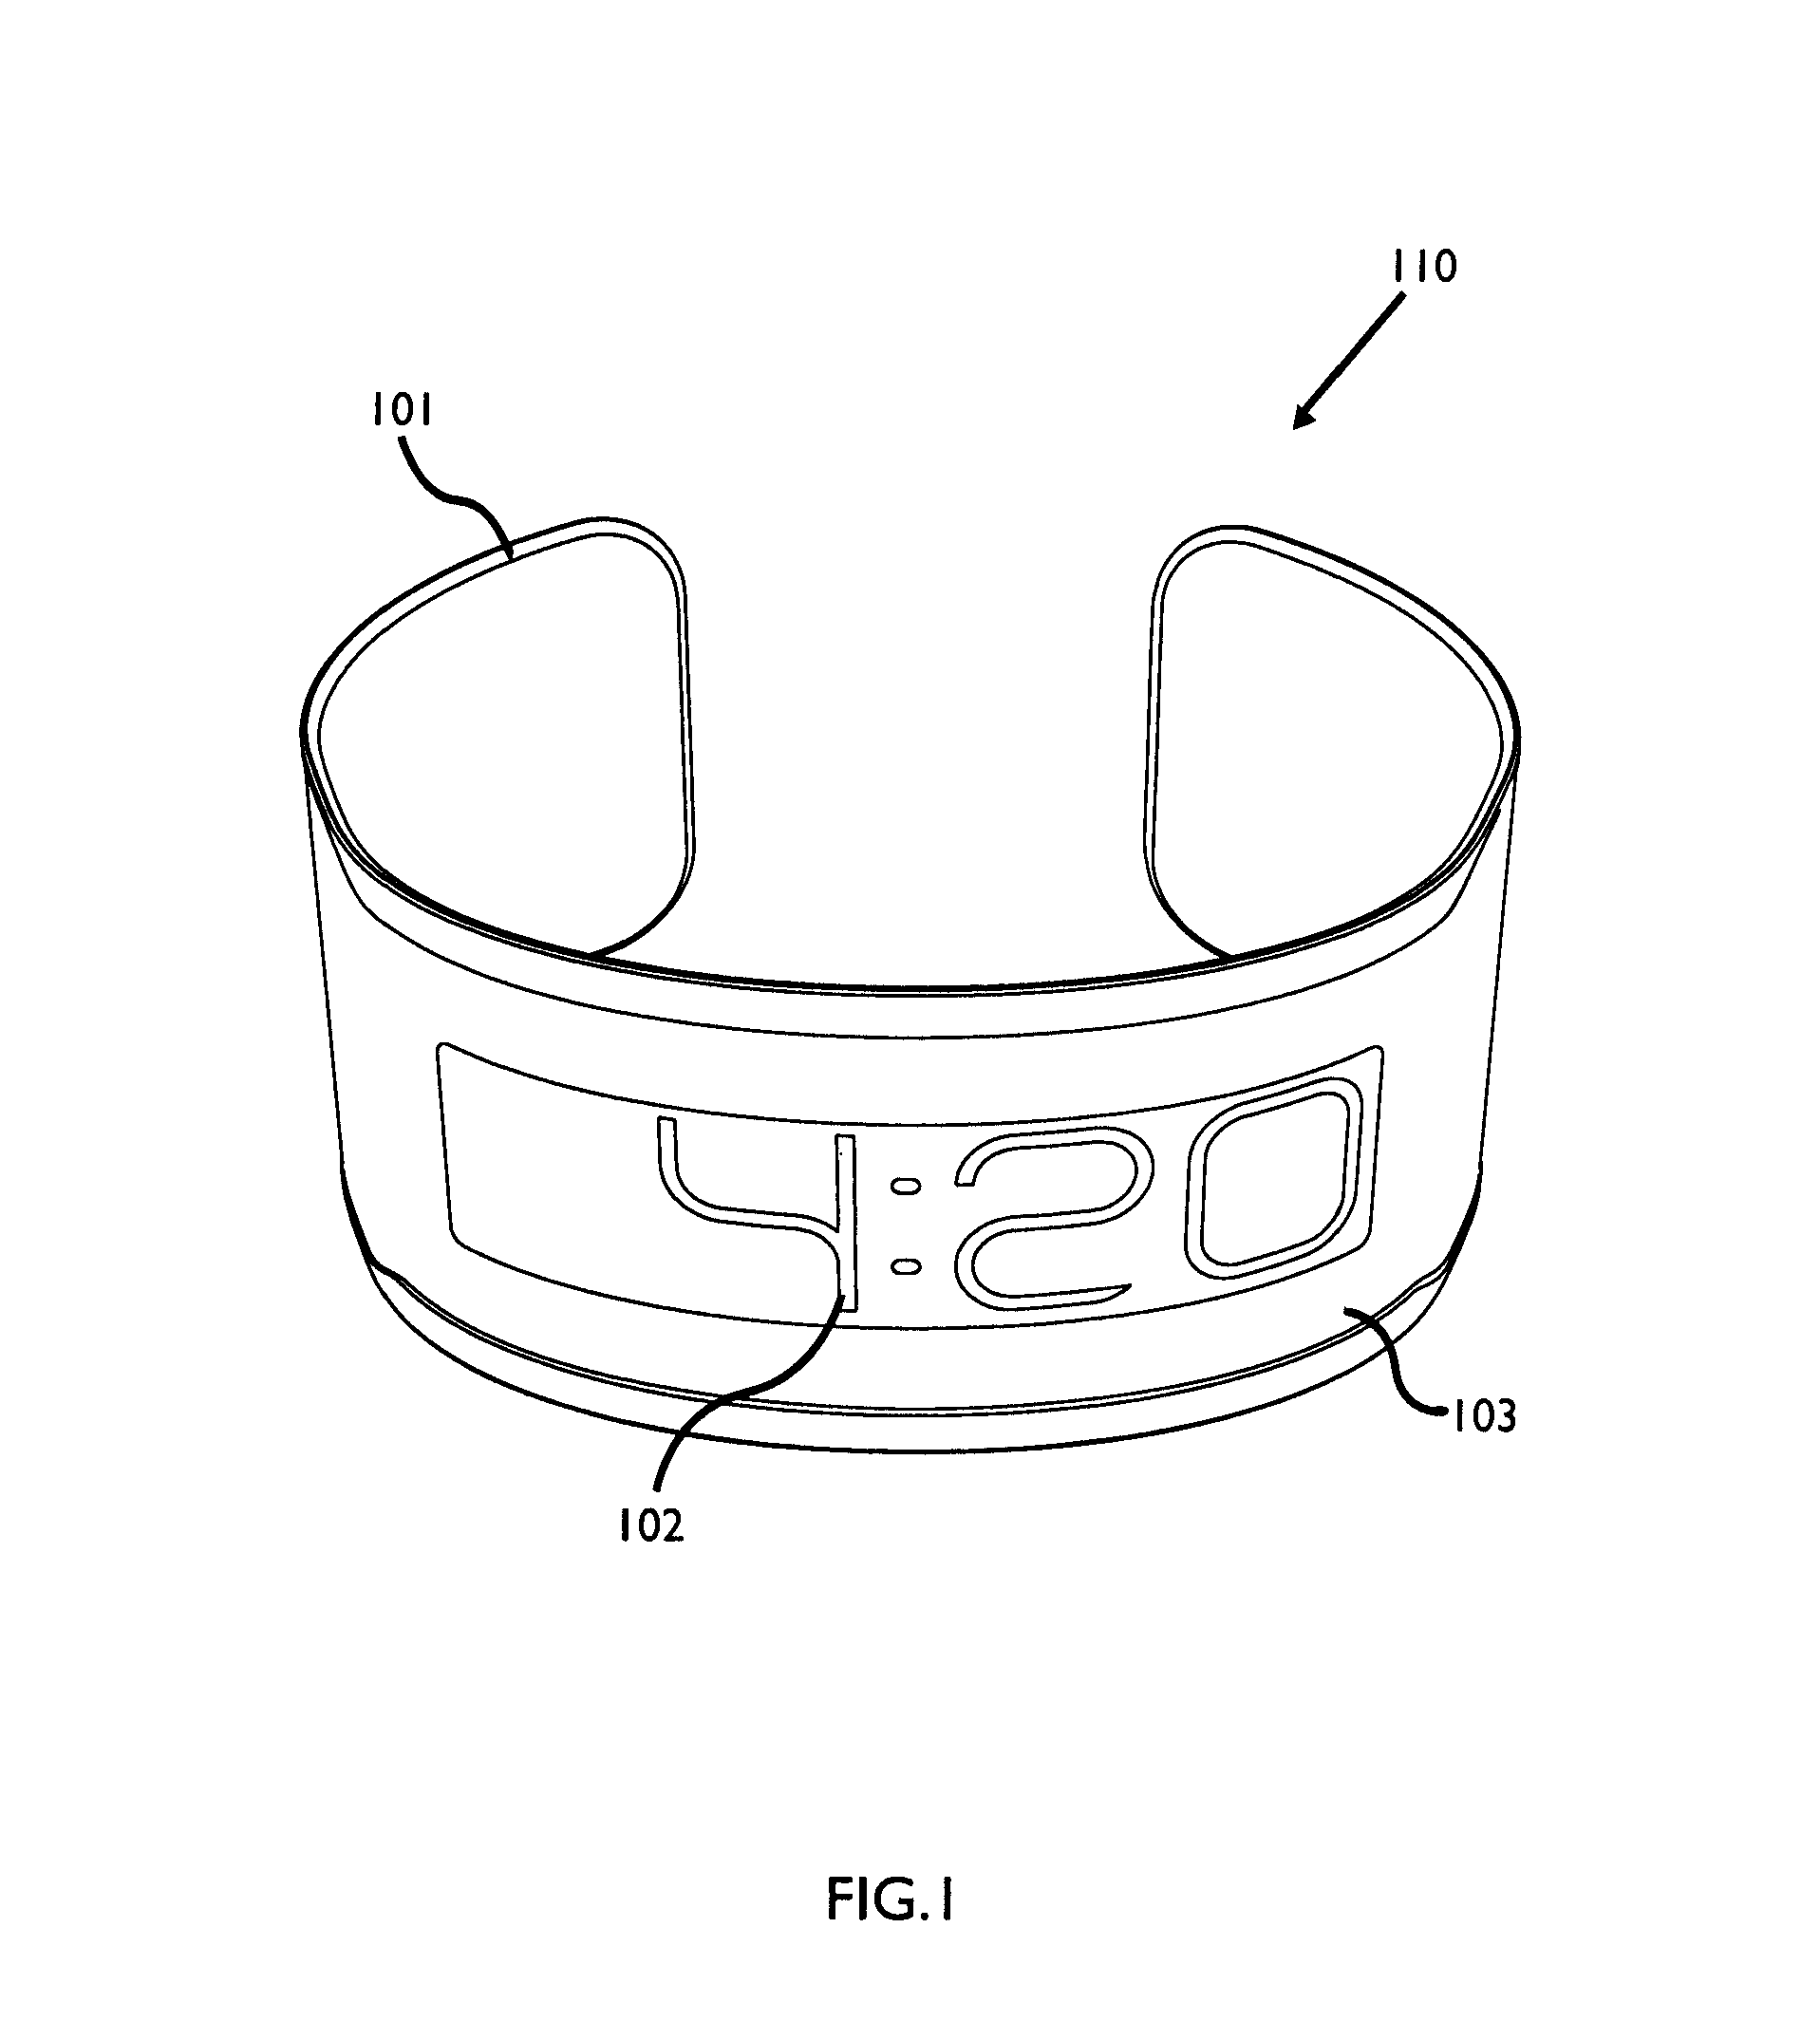 Flexible wristwatch with segmented e-paper display